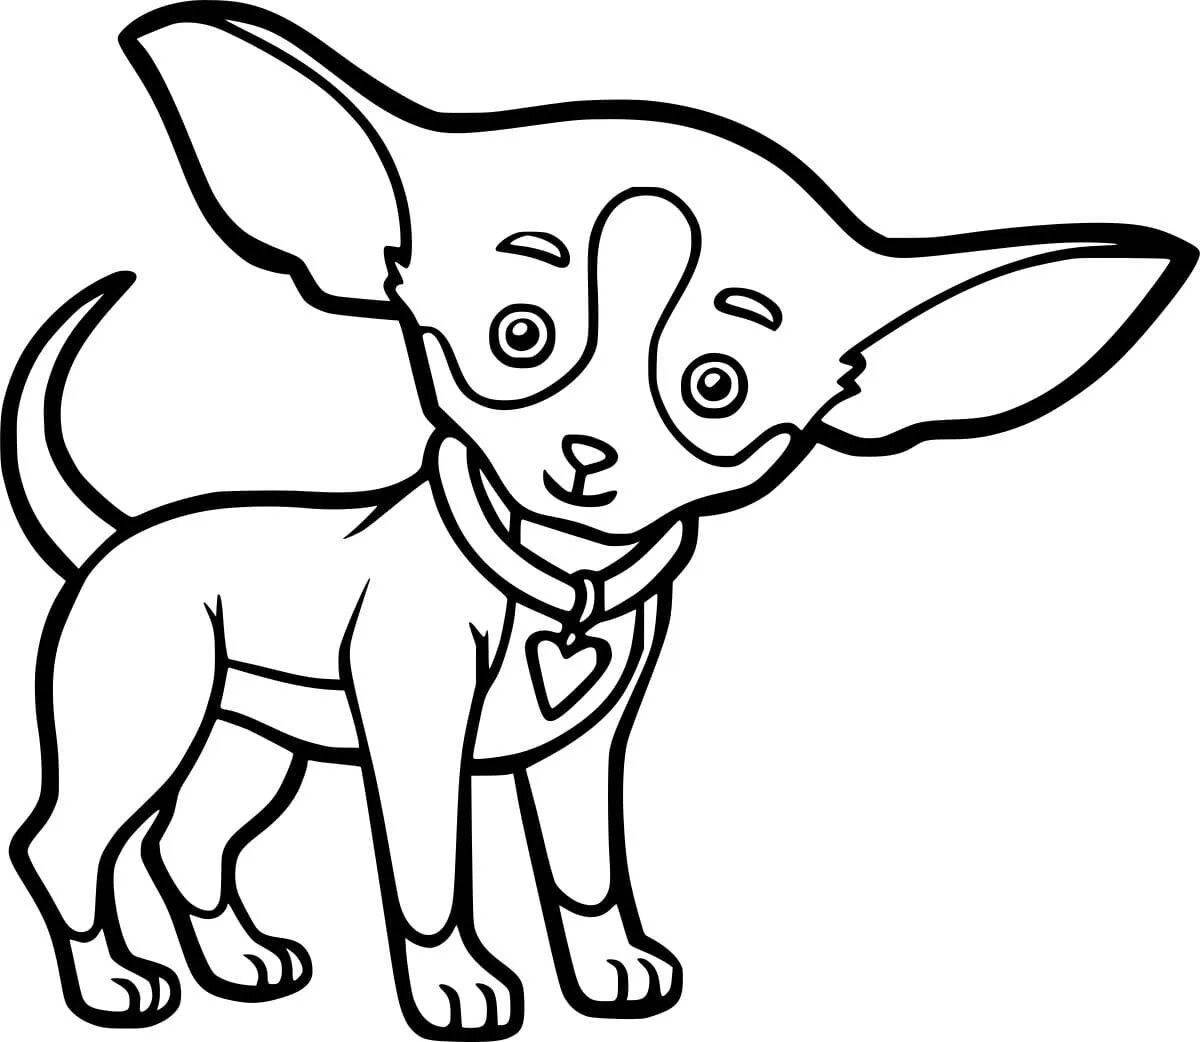 Unique chihuahua coloring page for kids